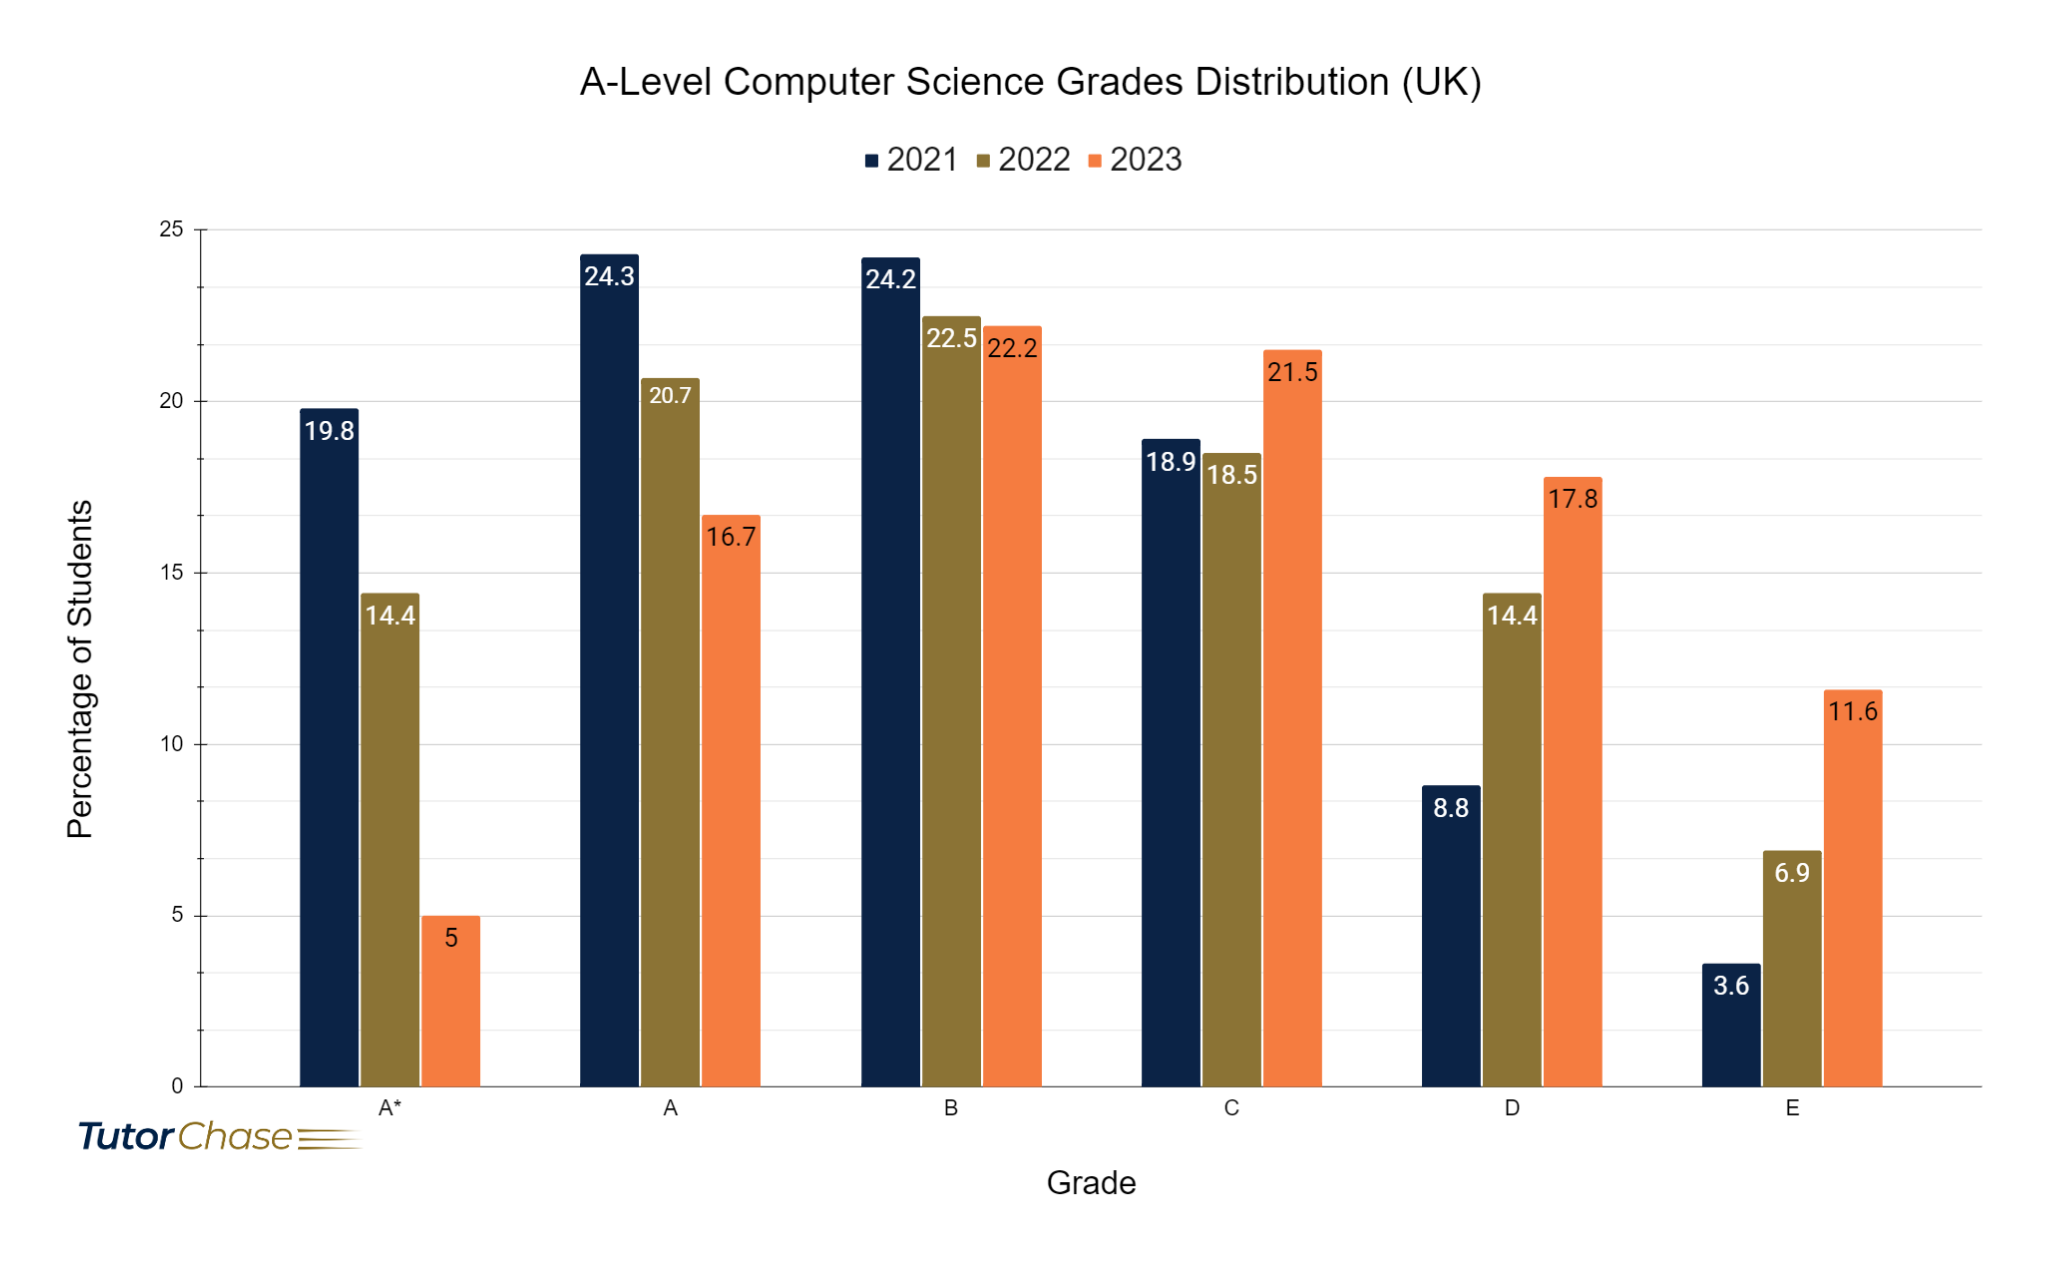 Grades distribution of A-Level Computer Science in UK 2021-2023